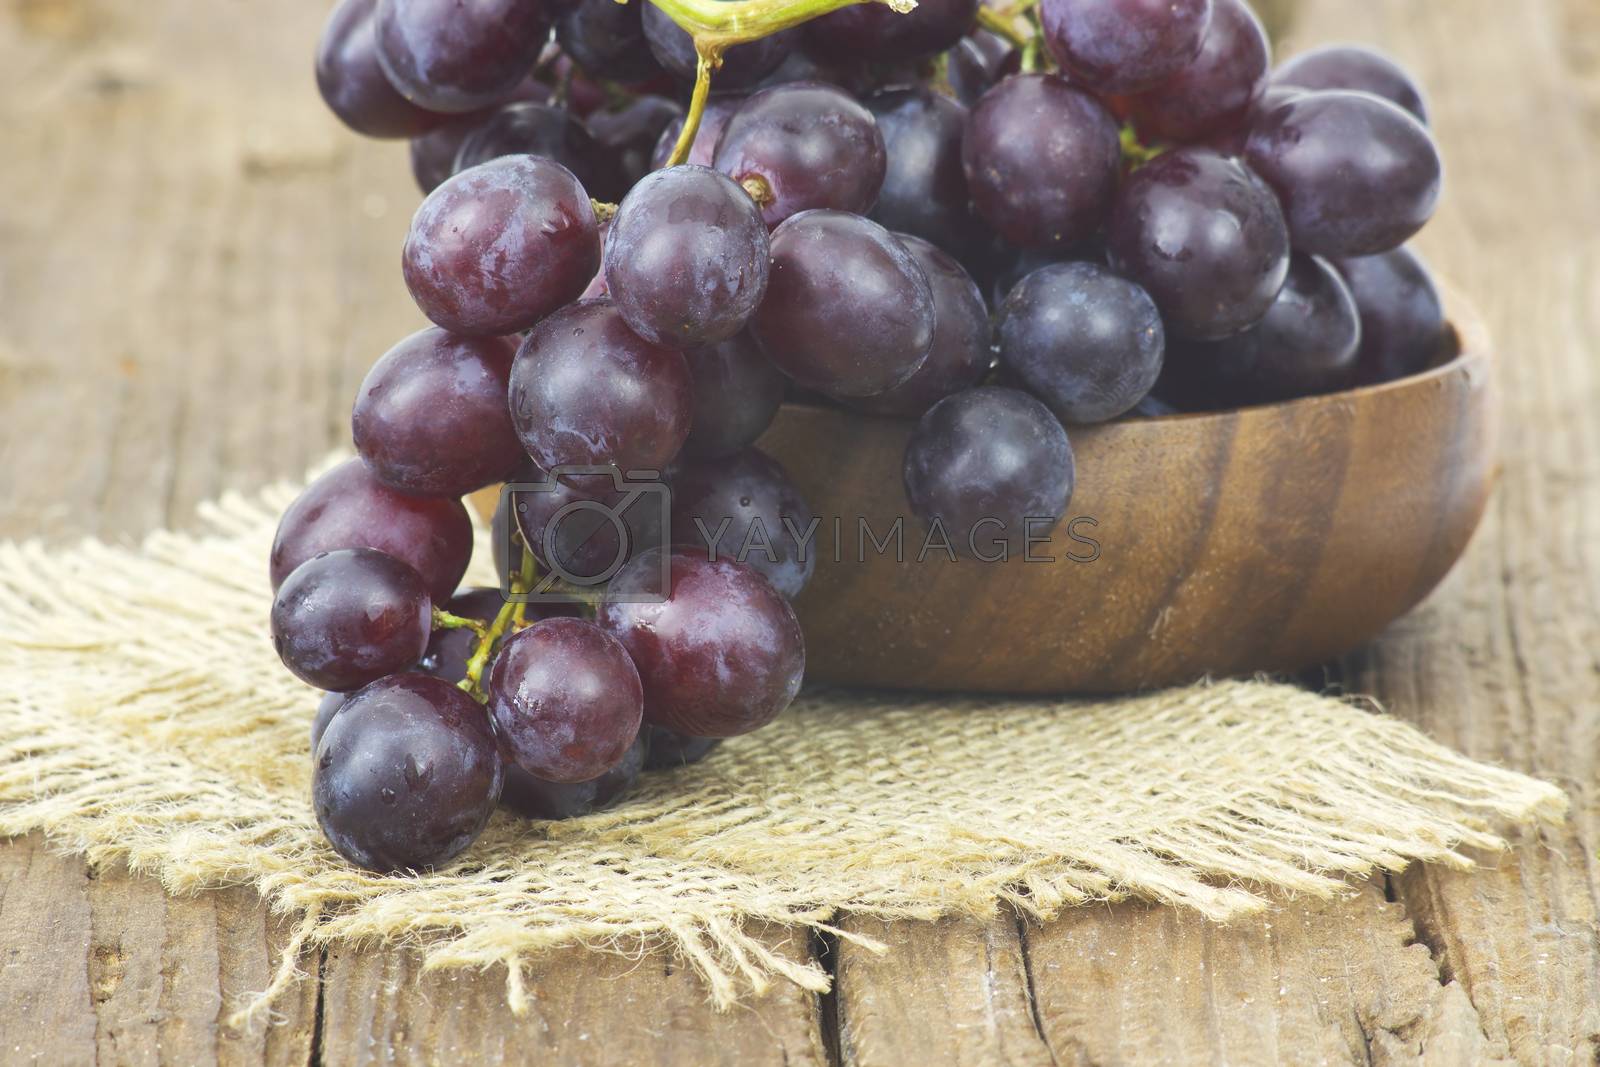 Royalty free image of grapes in a bowl by miradrozdowski